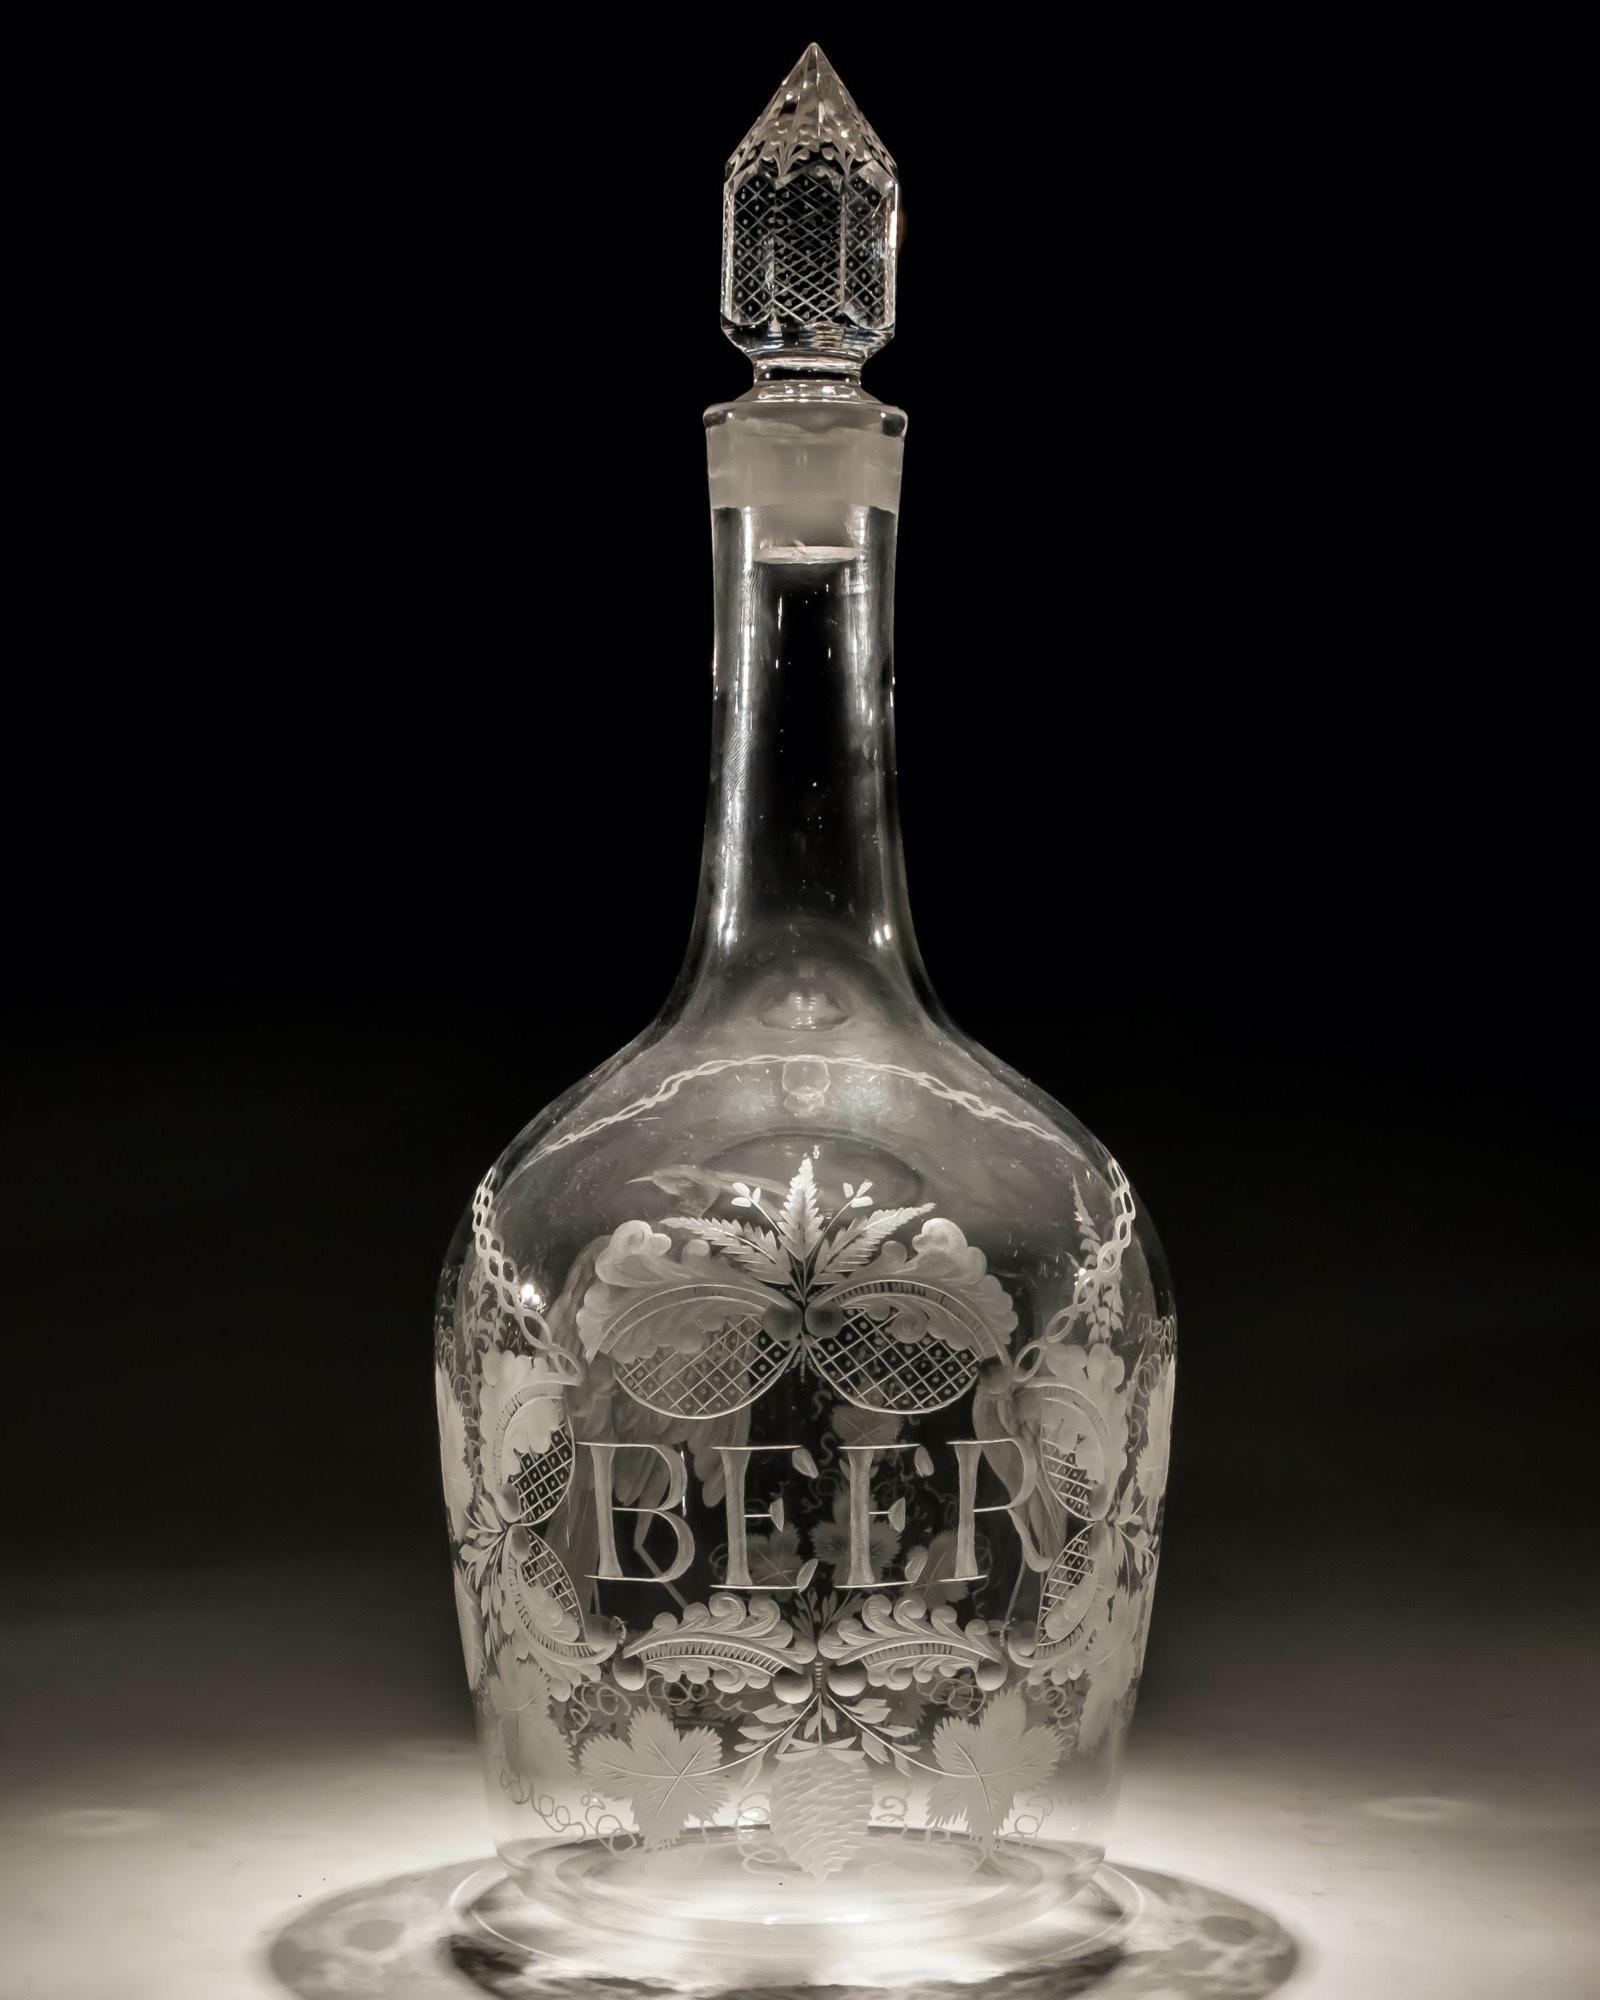 A rare Georgian decanter of shoulder form wheel engraved with a BEER cartouche surrounded with hops and vines, The reverse engraved with exotic game birds identical to those used by James Giles on his glided decanters.

The decanter holding just